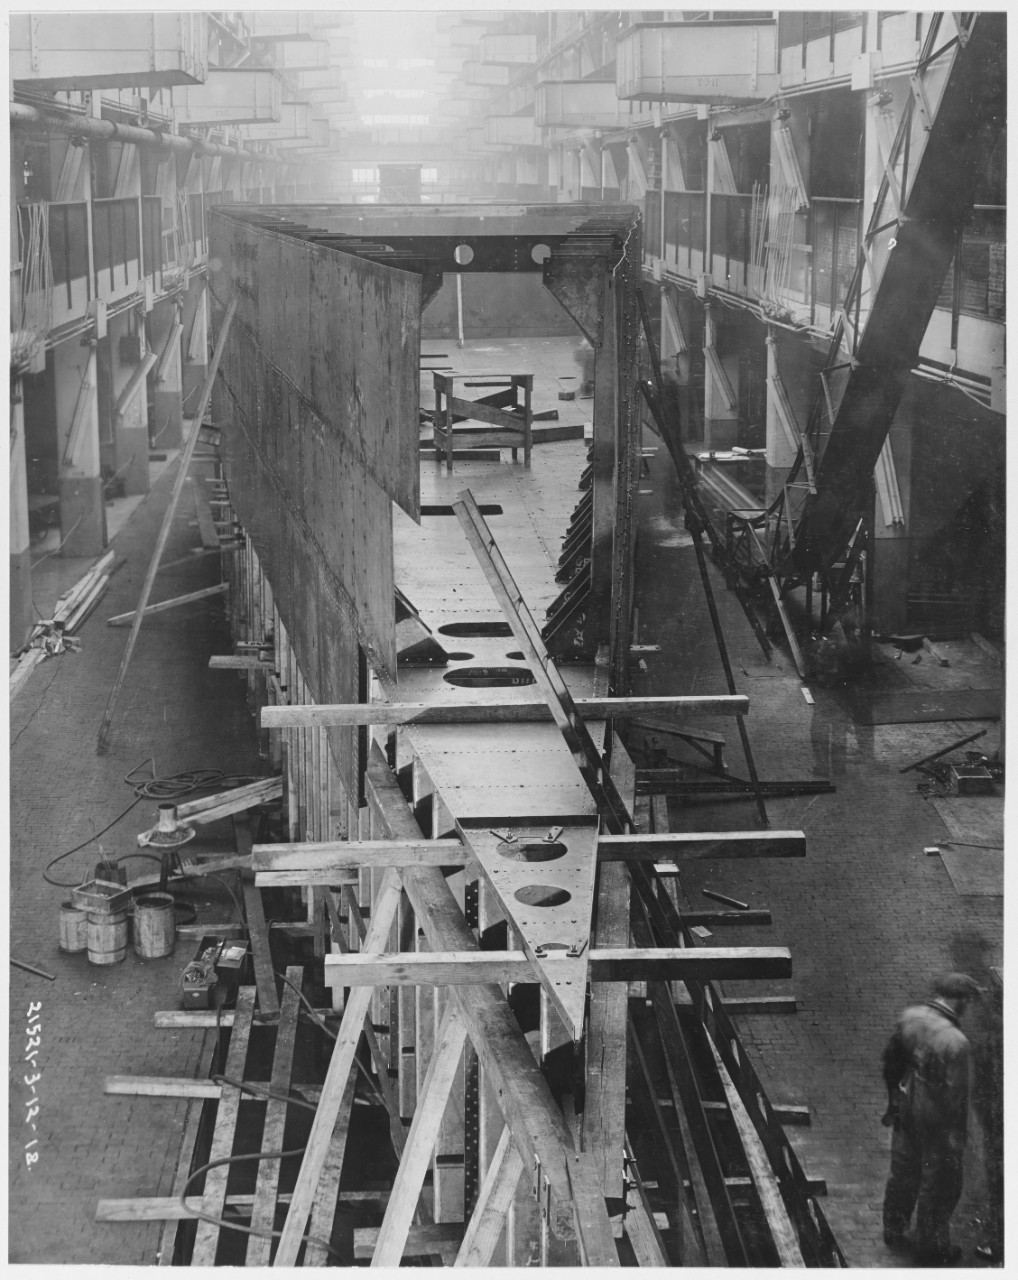 Construction of Ford Eagle Boats, Ford Motor Company, March 12, 1918